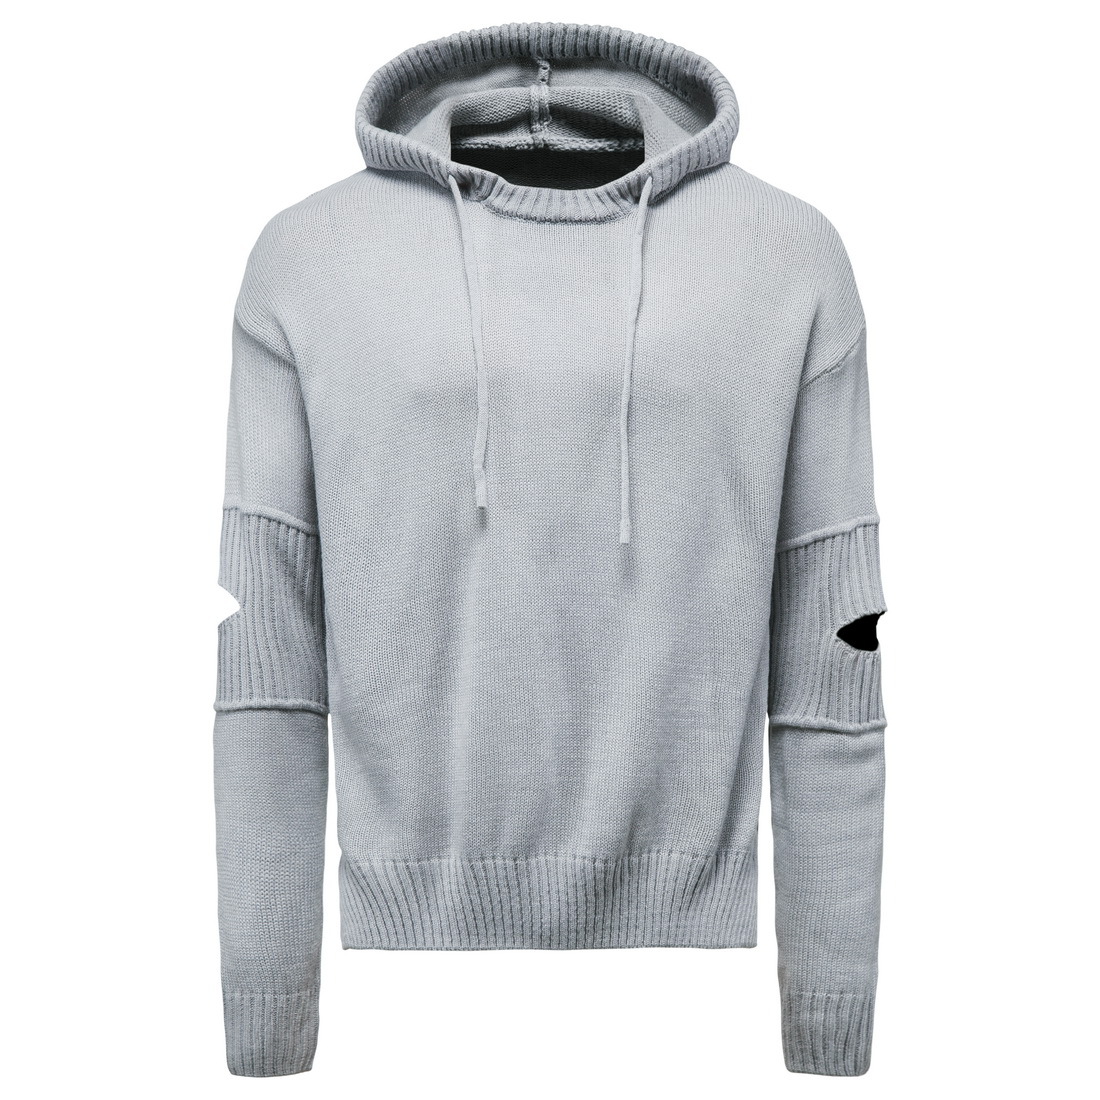 Fashion Men Knitted Sweater Autumn Clothing Solid Plus Size Hooded Pullover Hoodies